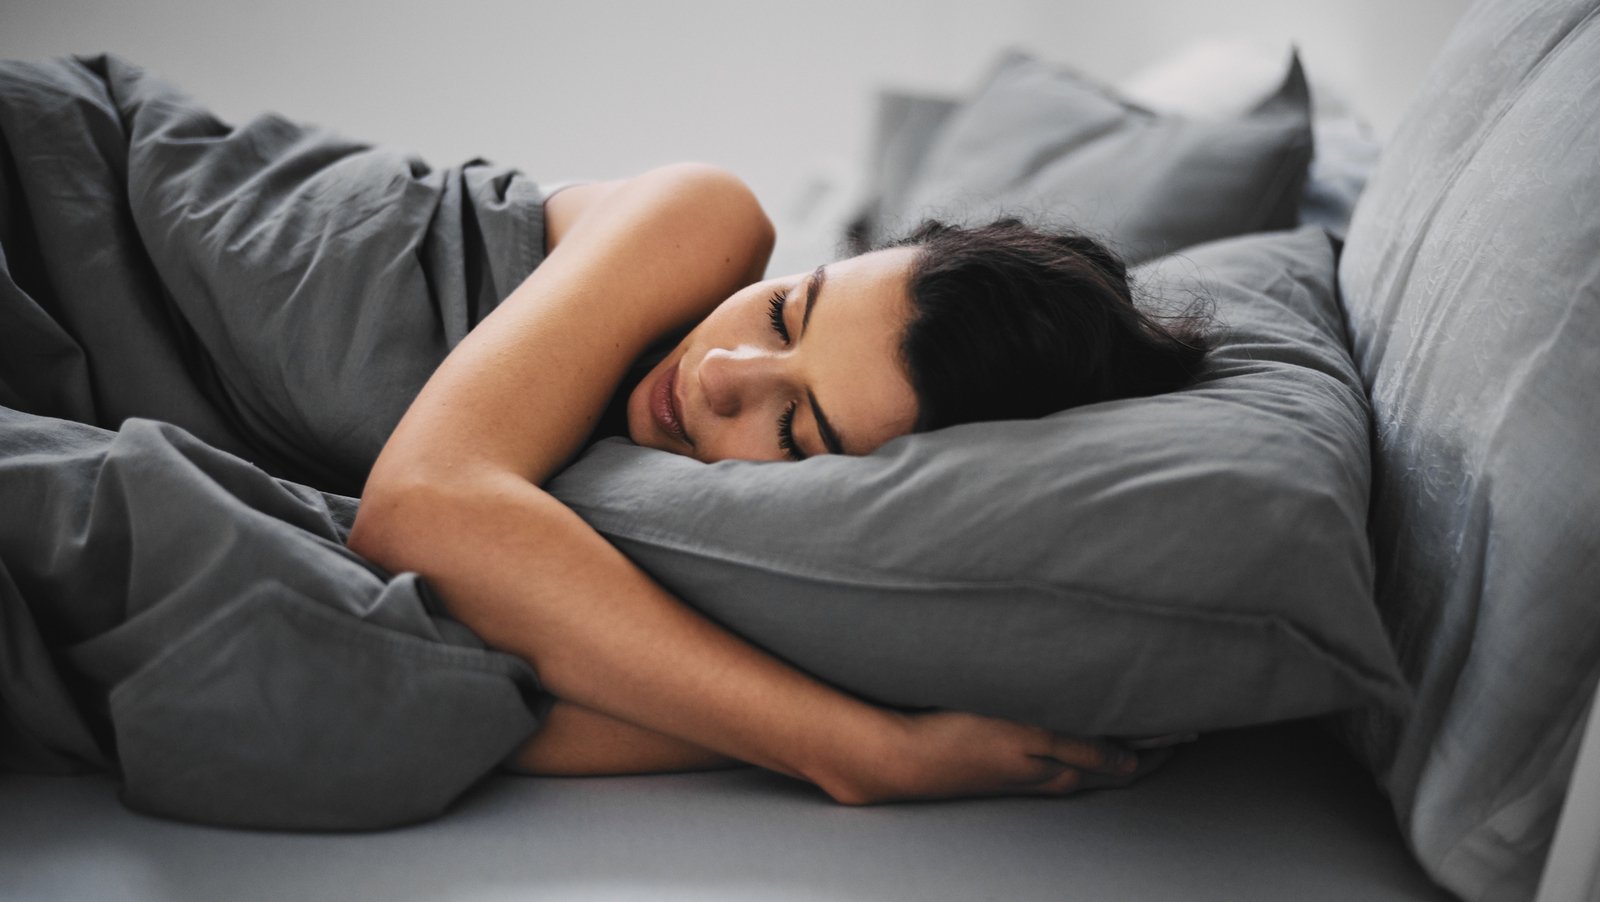 Why You Should Go To Sleep And Wake Up At The Same Time Every Day